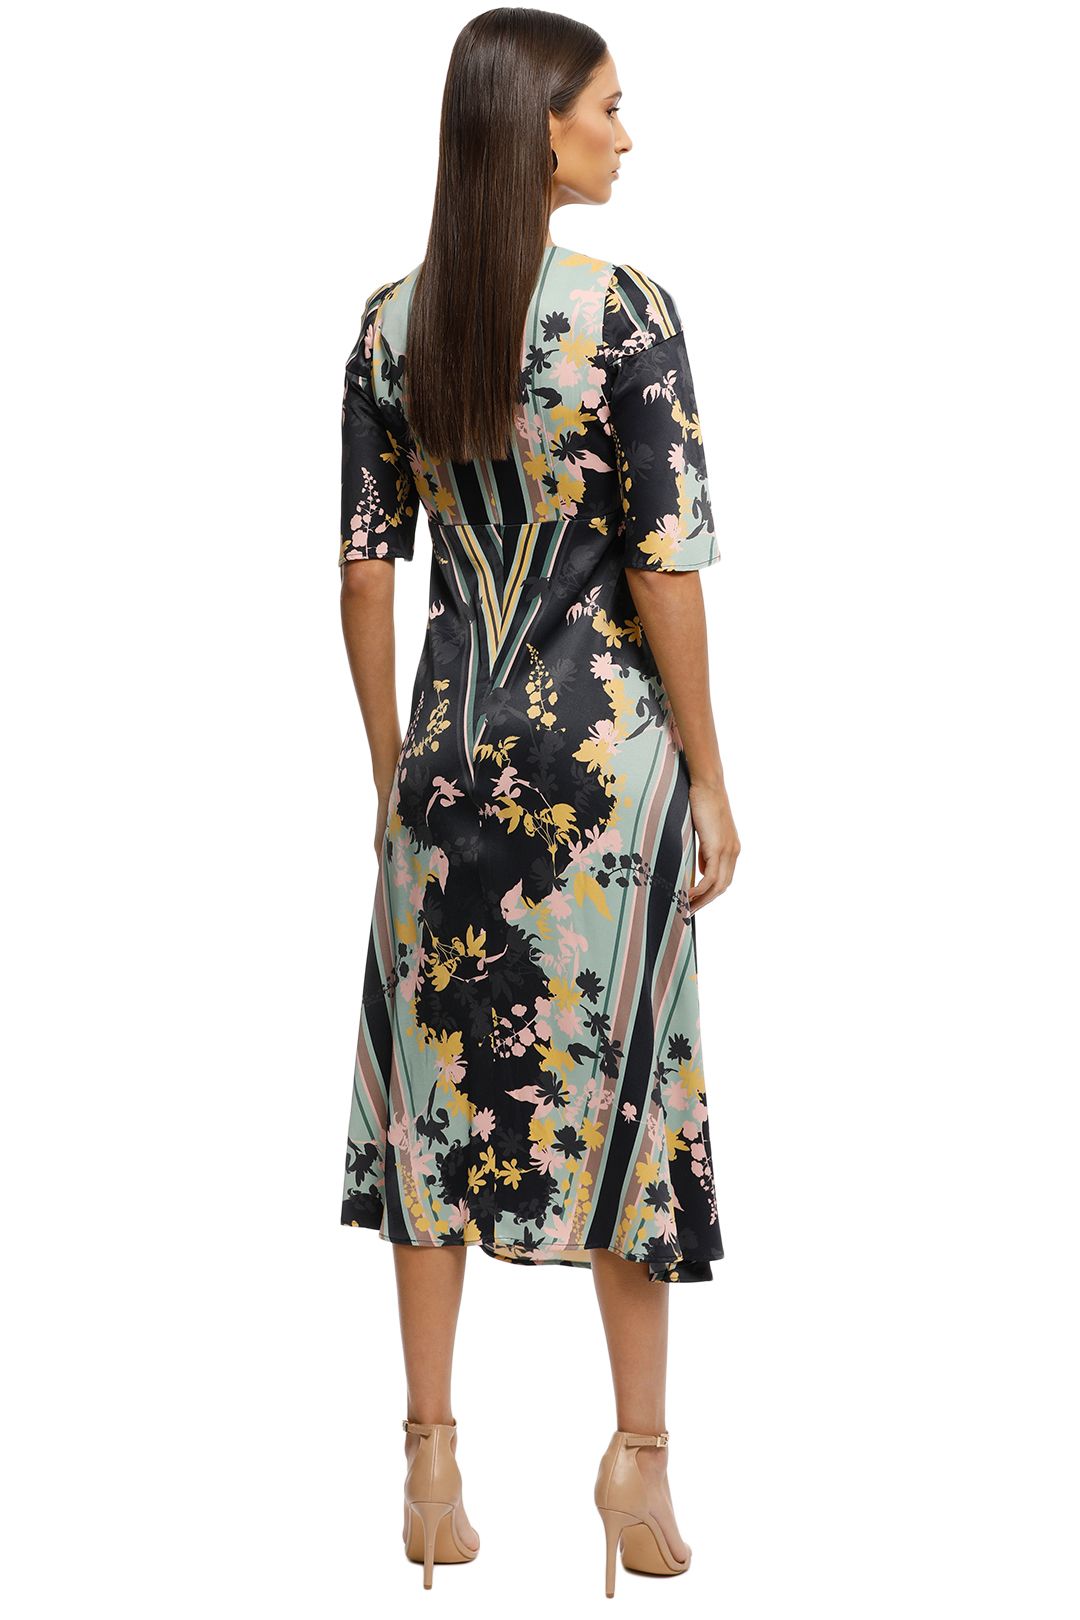 Moss-and-Spy-Mayflower-Dress-Floral-Back